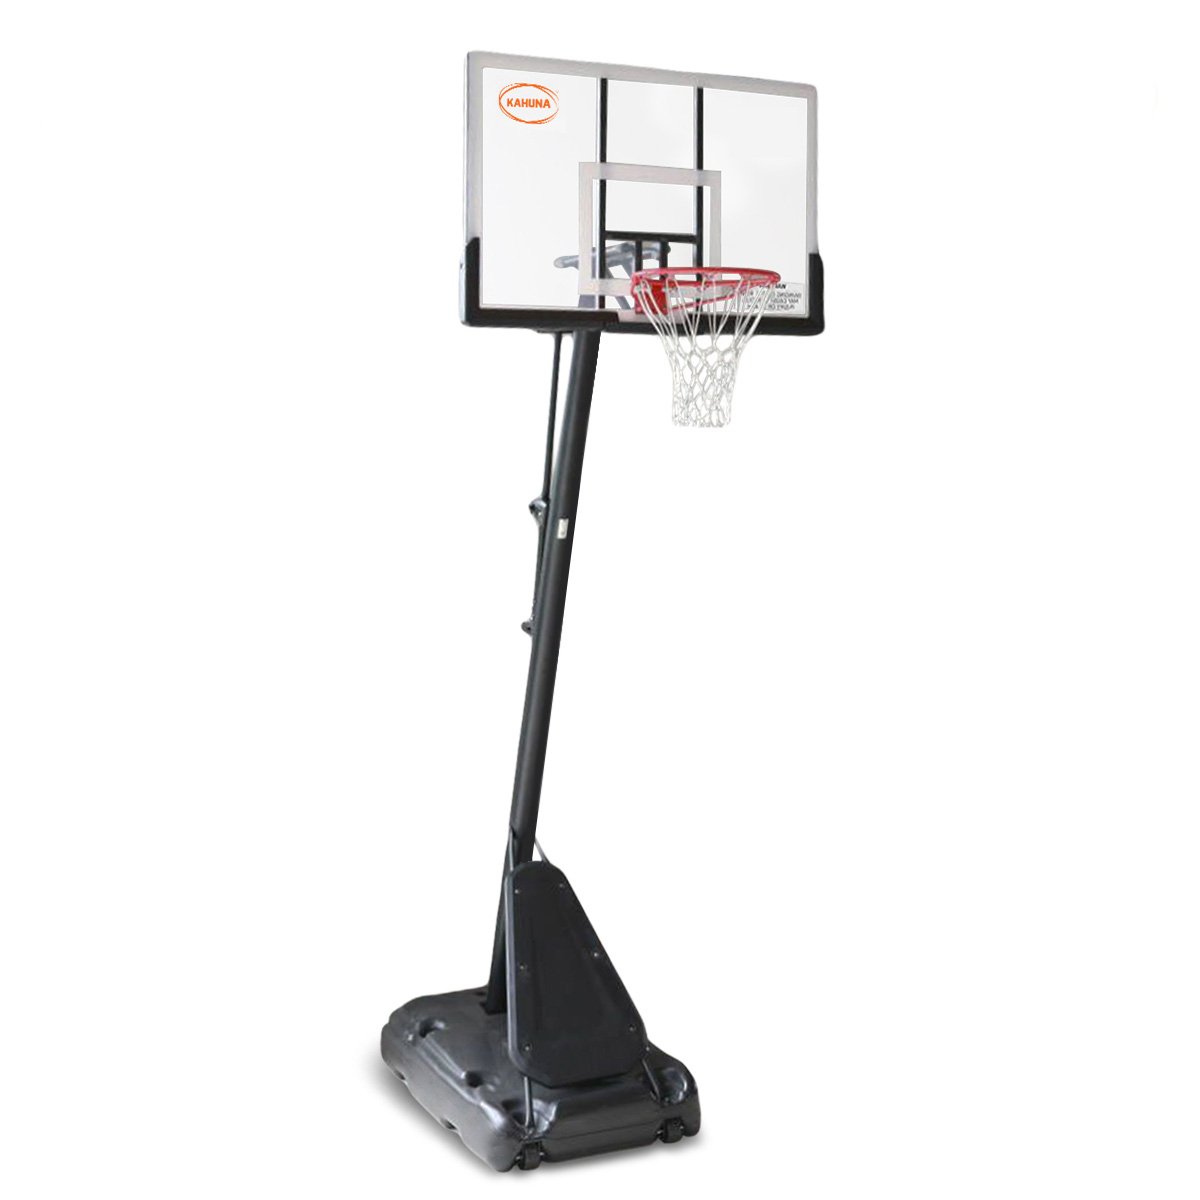 Kahuna Portable Basketball Hoop System 2.3 to 3.05m for Kids & Adults 2